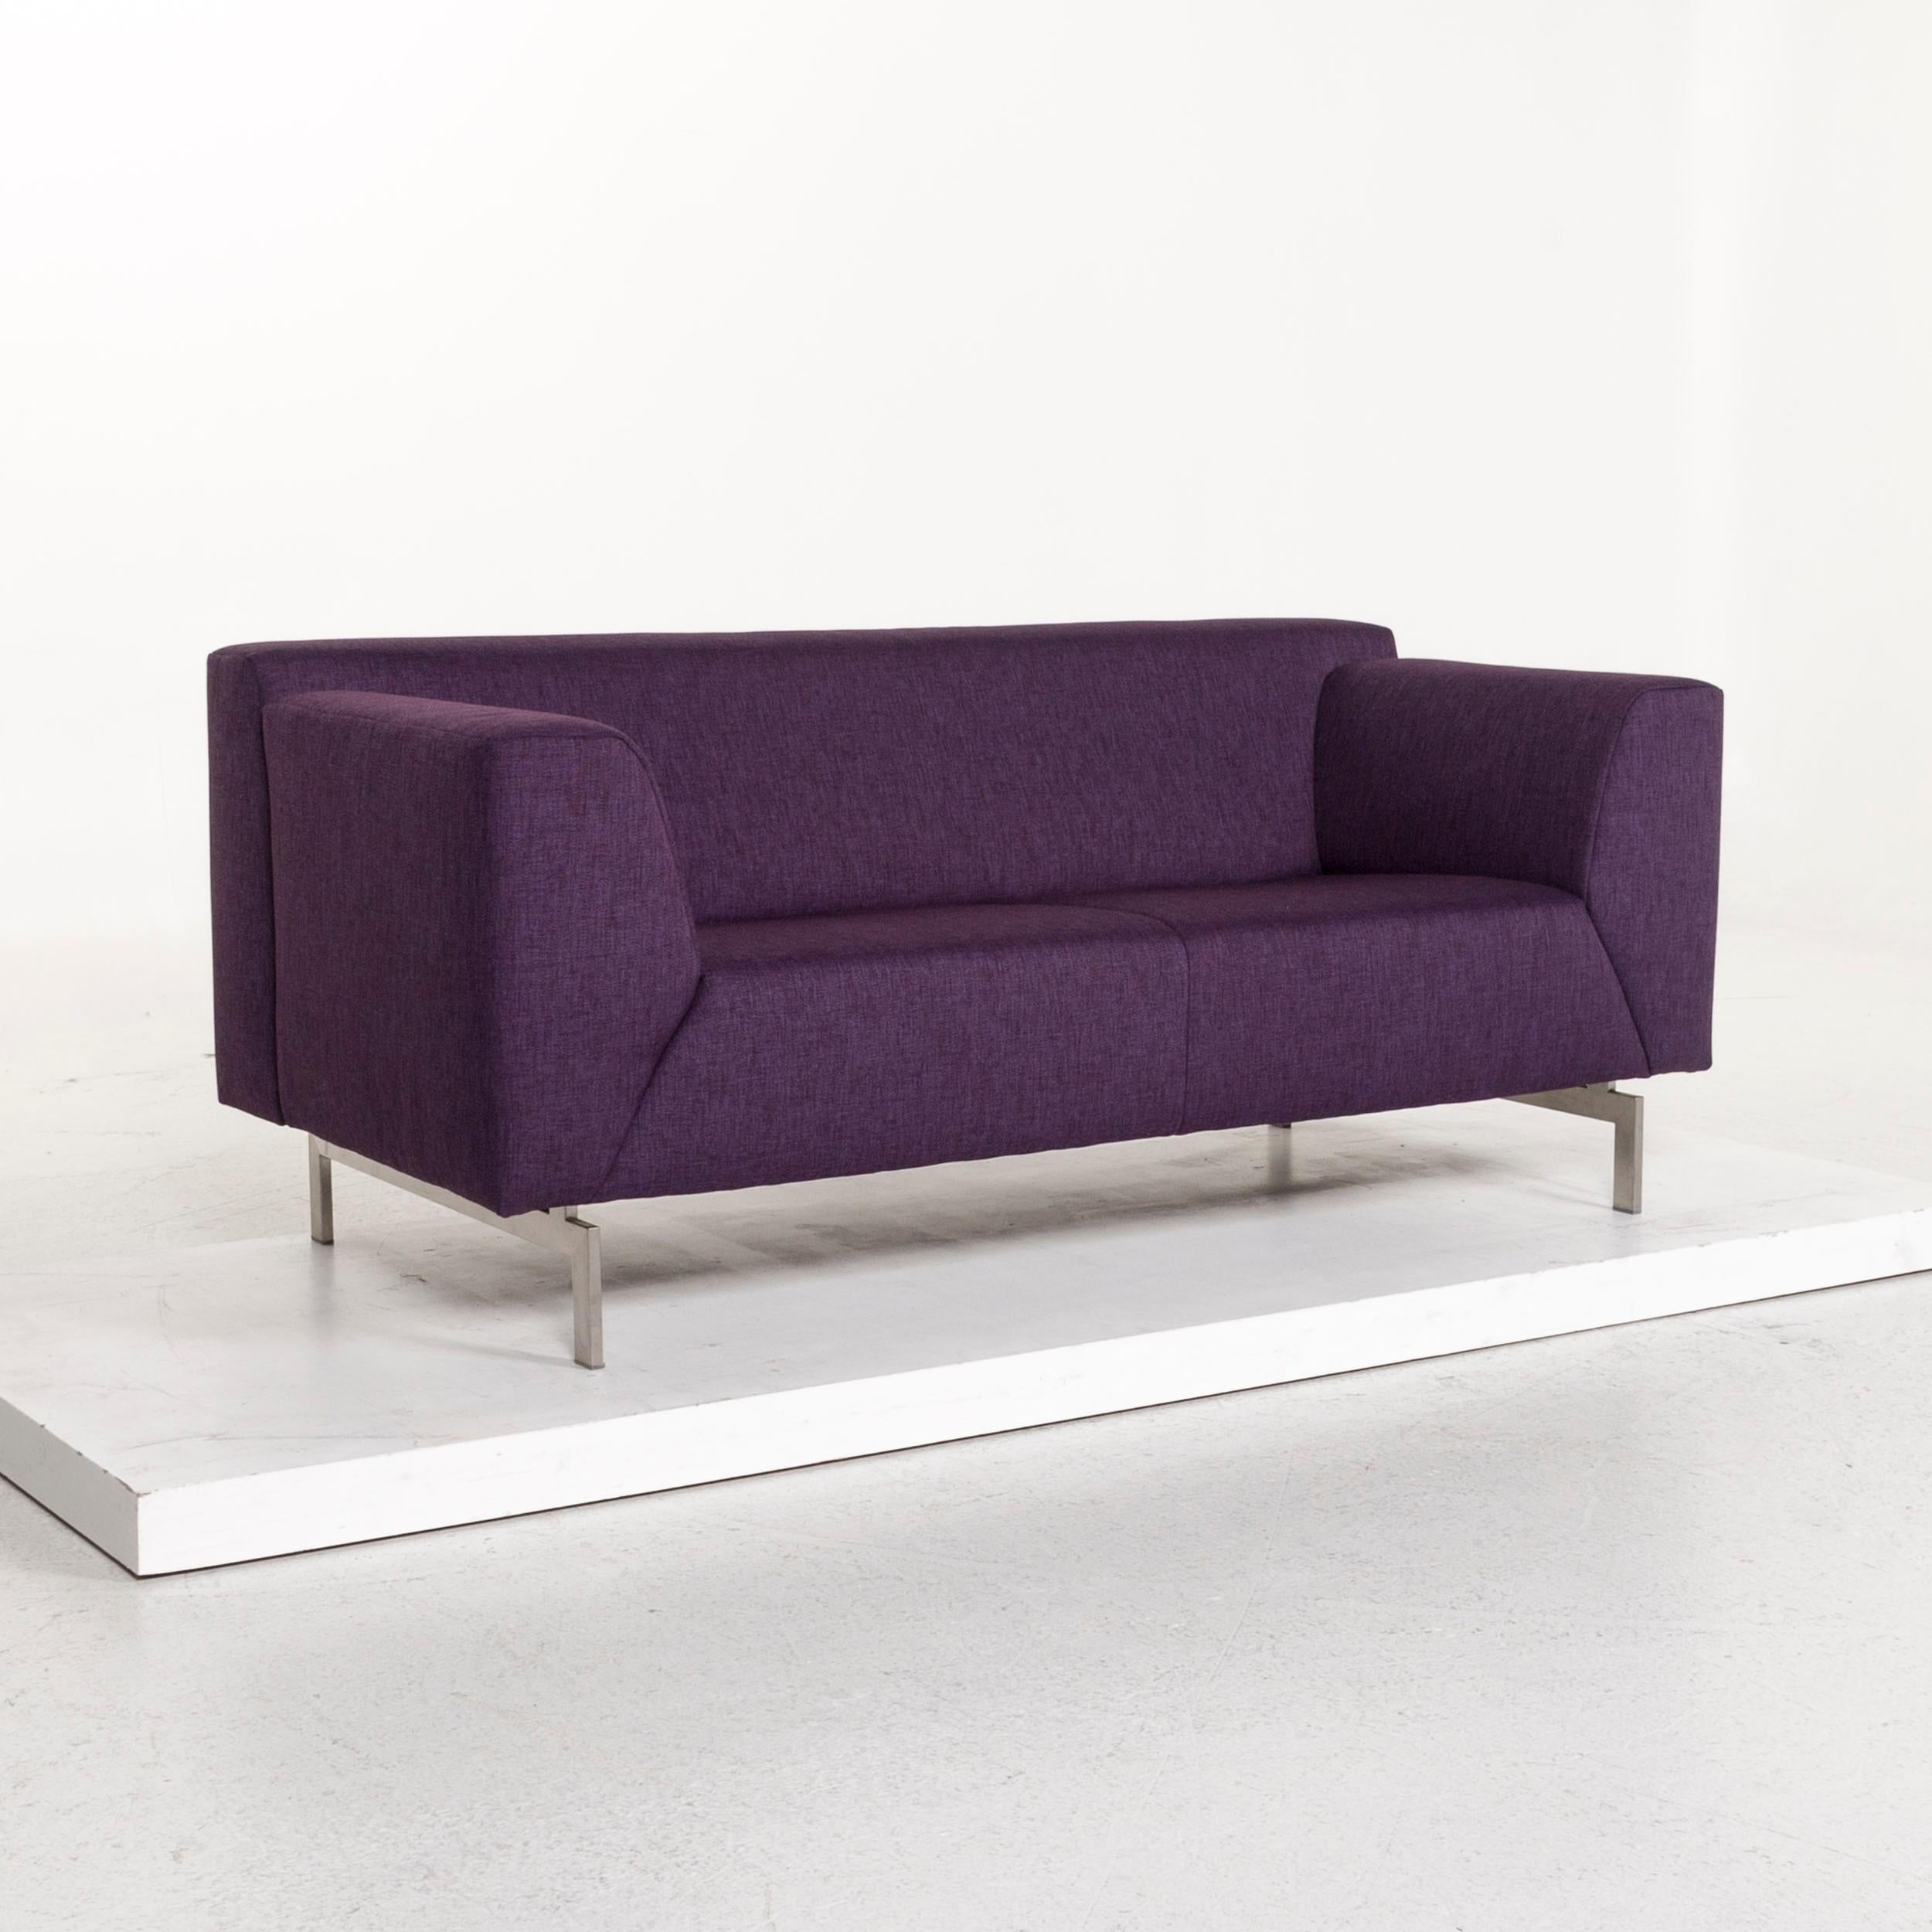 Contemporary Rolf Benz Fabric Sofa Purple Three-Seat Couch